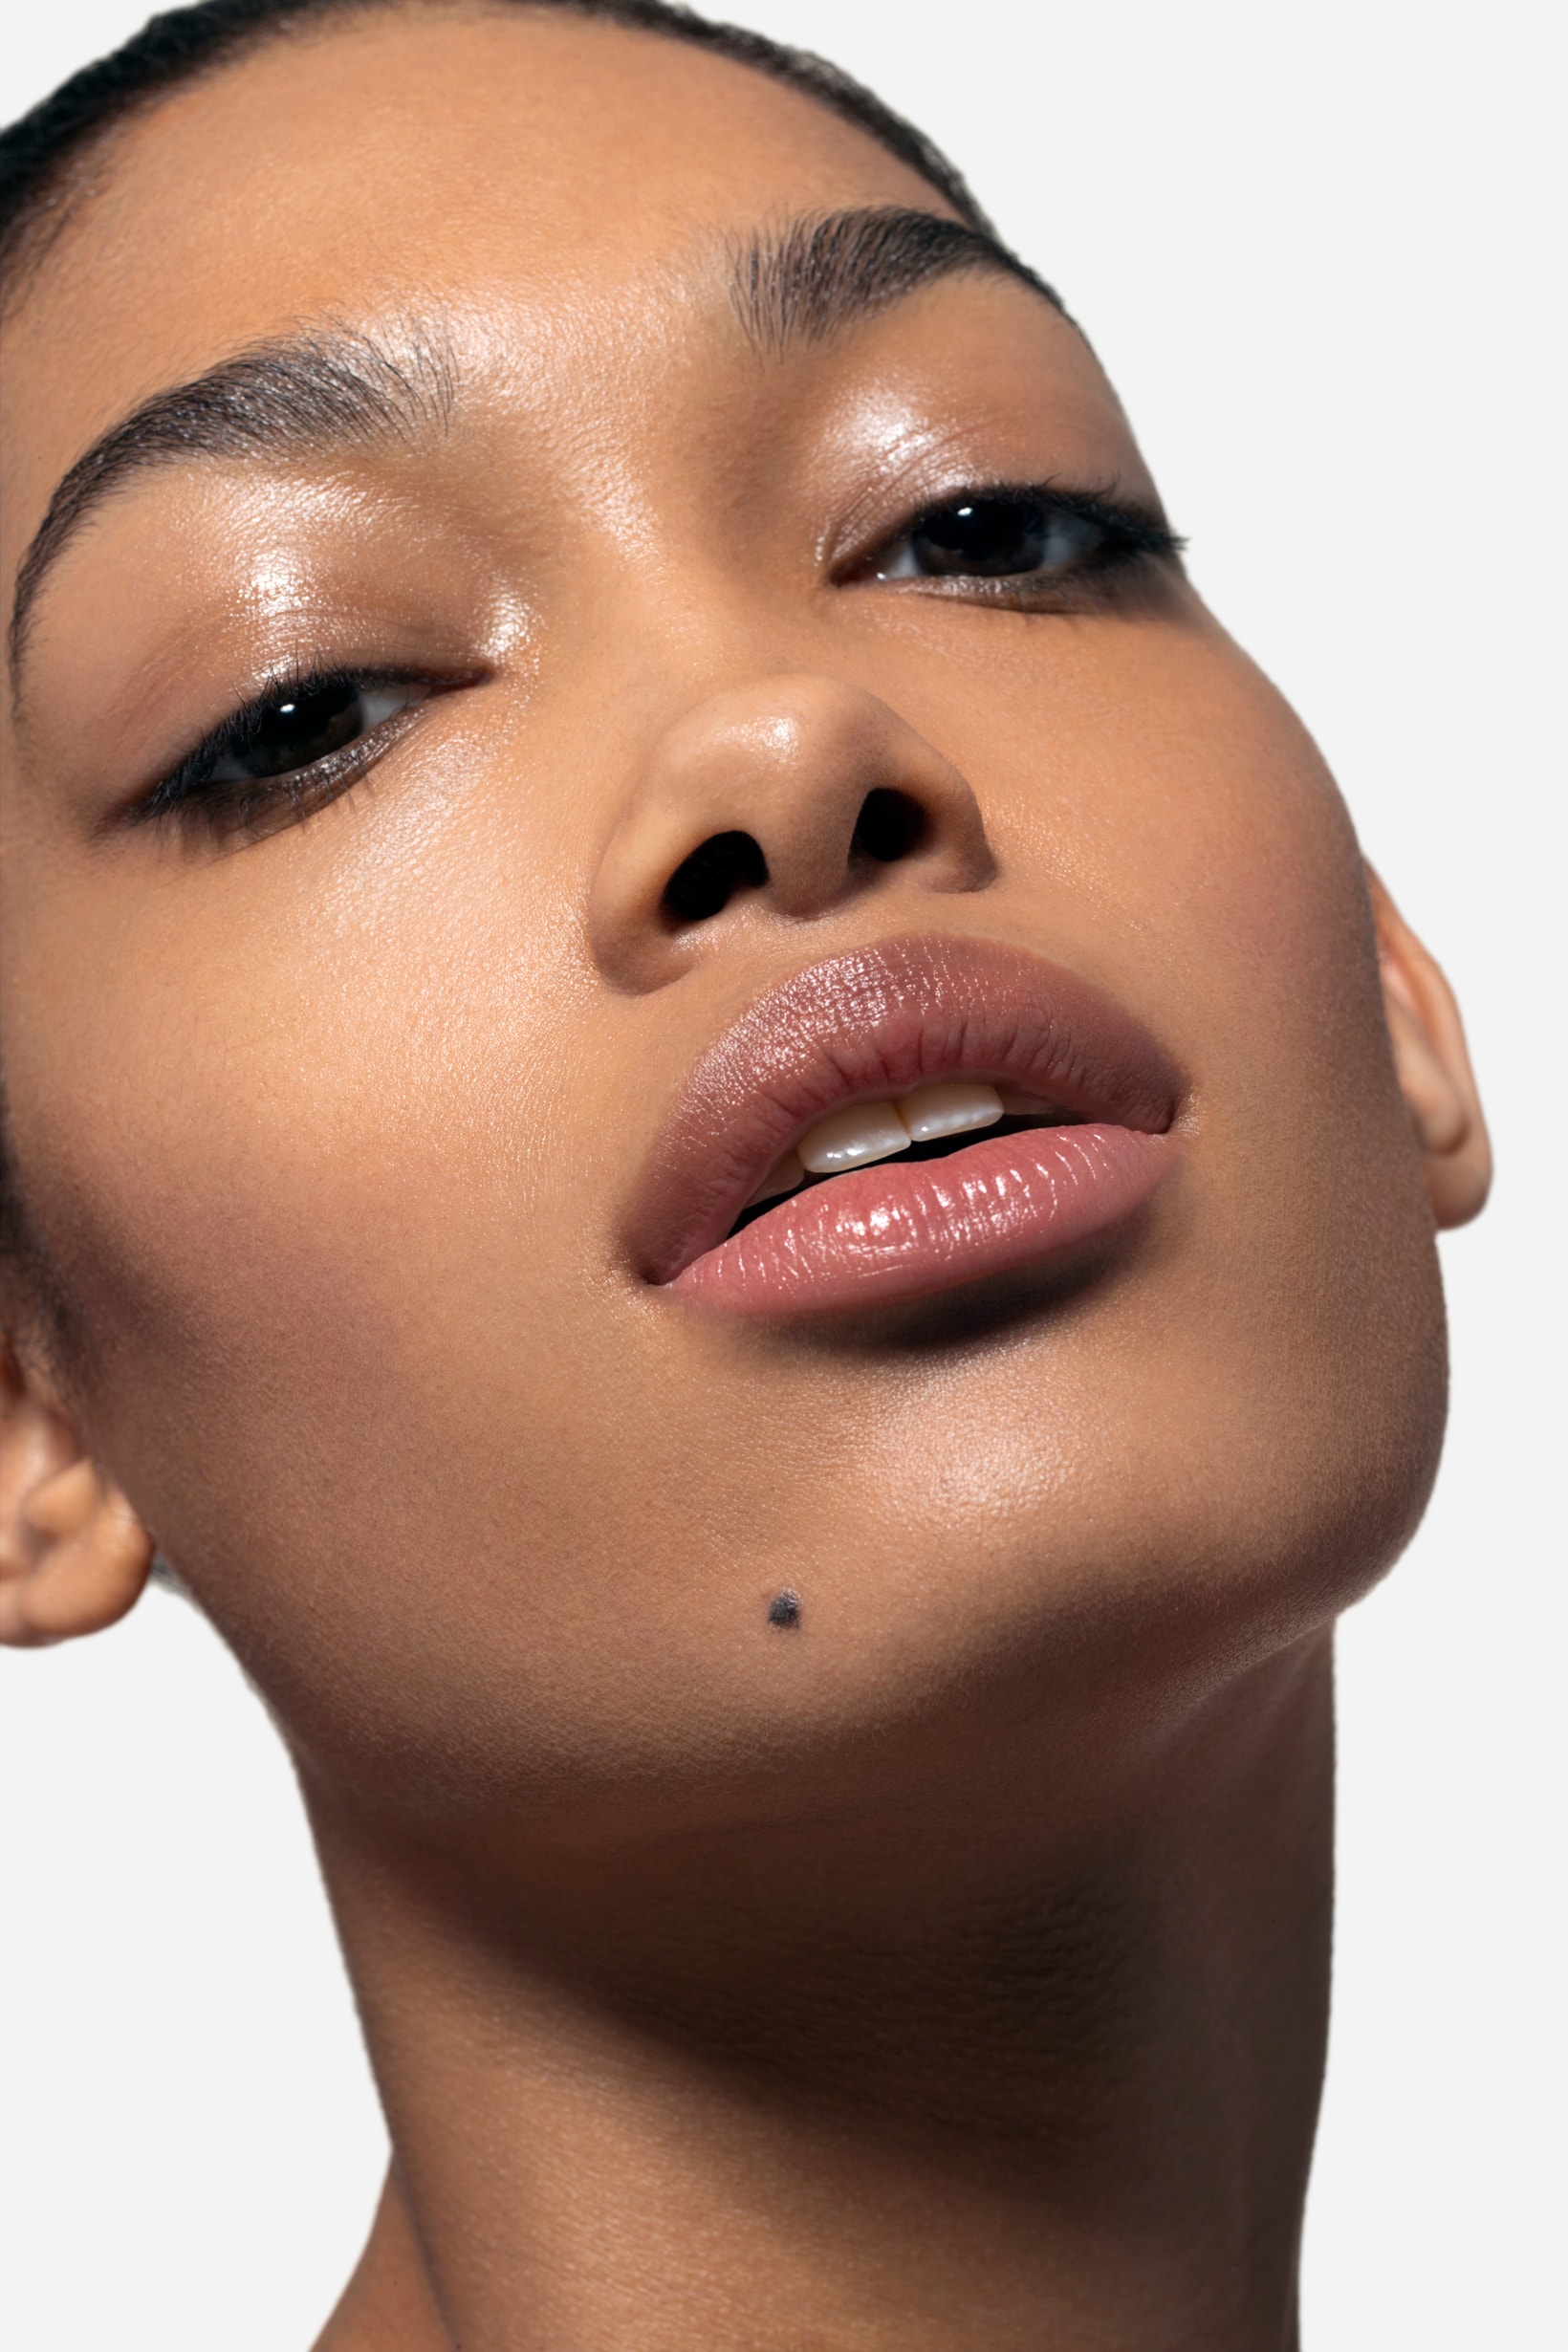 KITH x Estee Lauder Beauty Collection Campaign